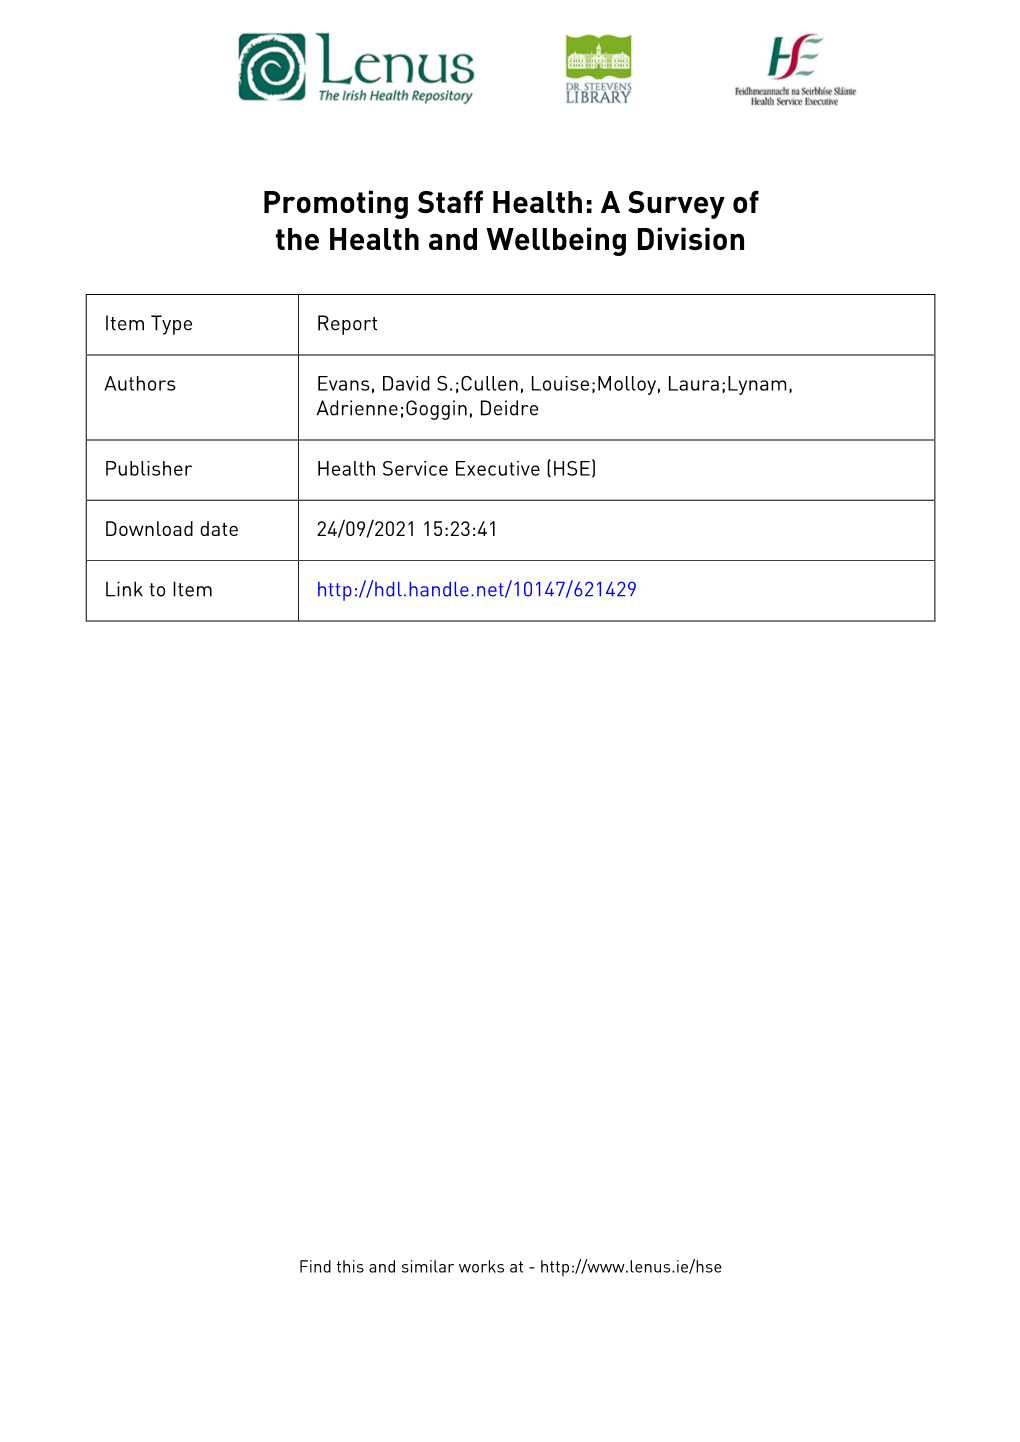 Promoting Staff Health: a Survey of the Health and Wellbeing Division